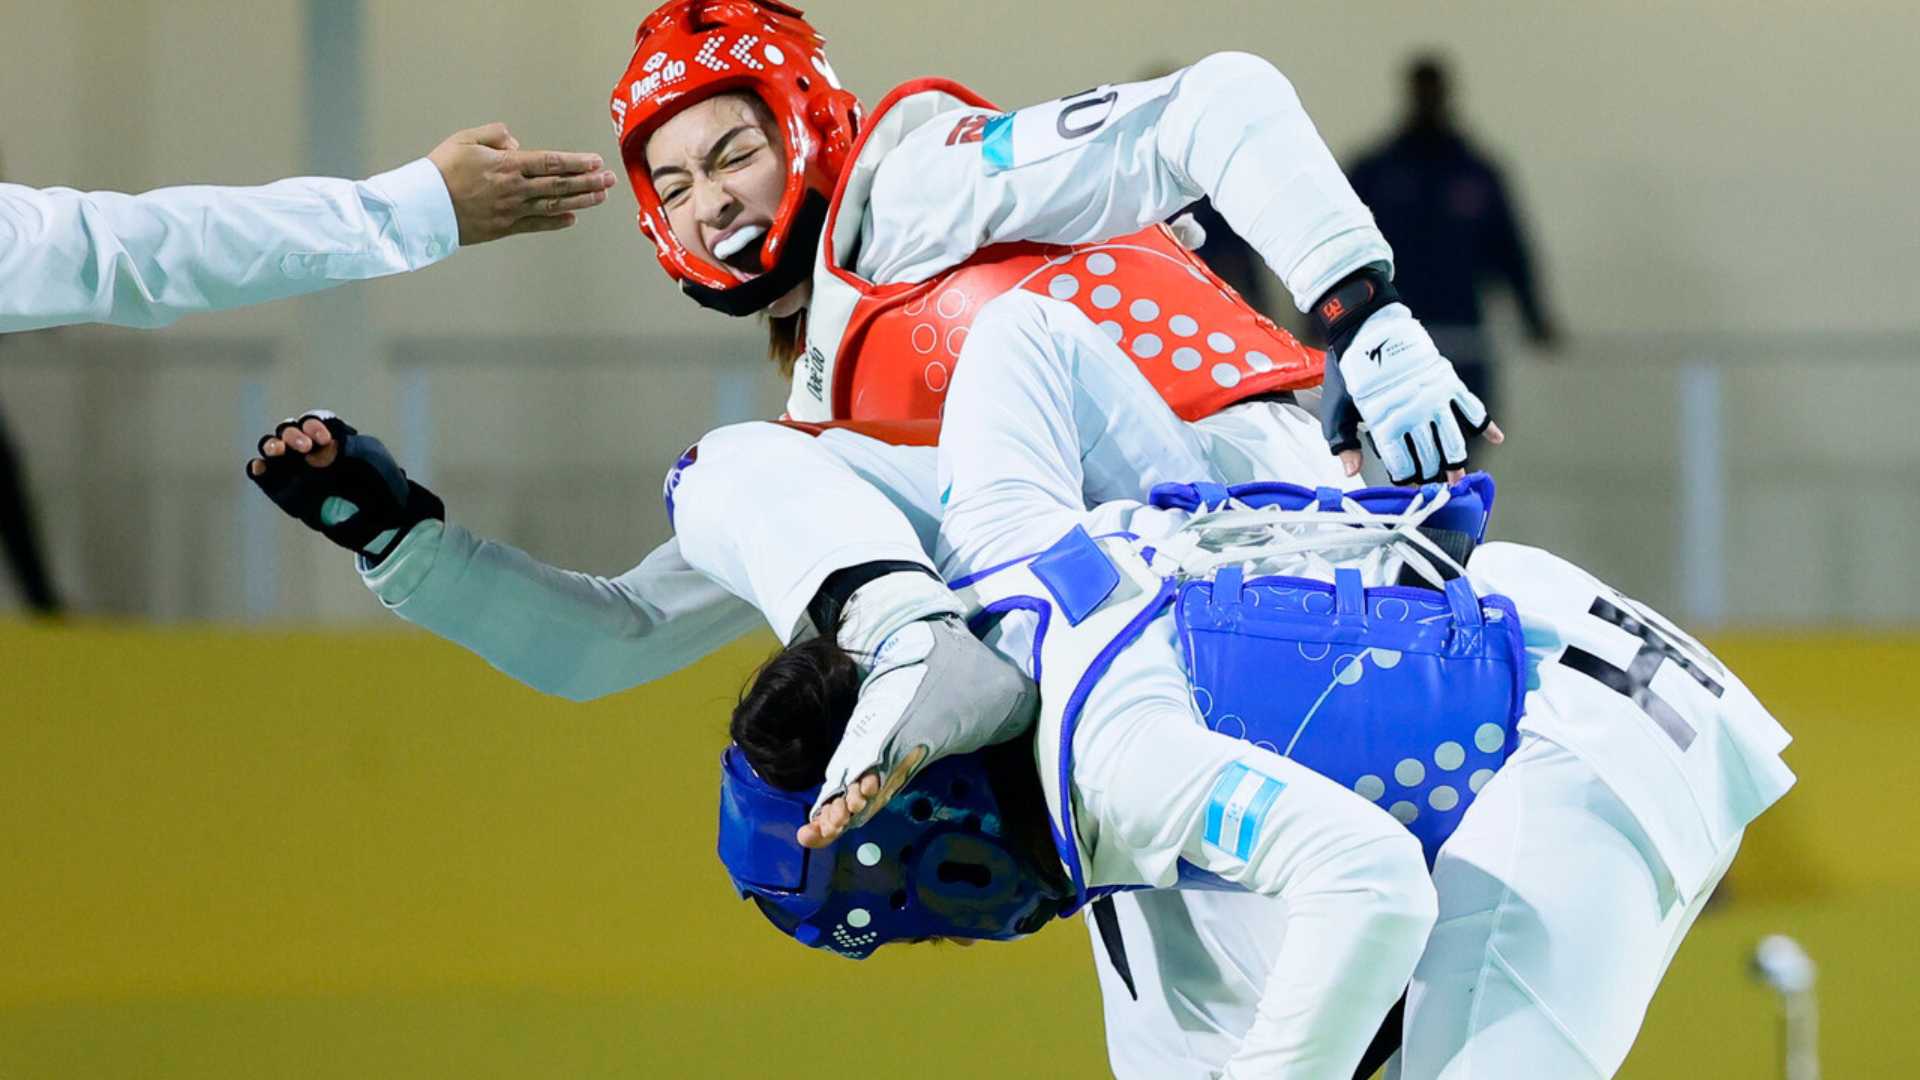 Claudia Gallardo adds another bronze medal for Chile in taekwondo